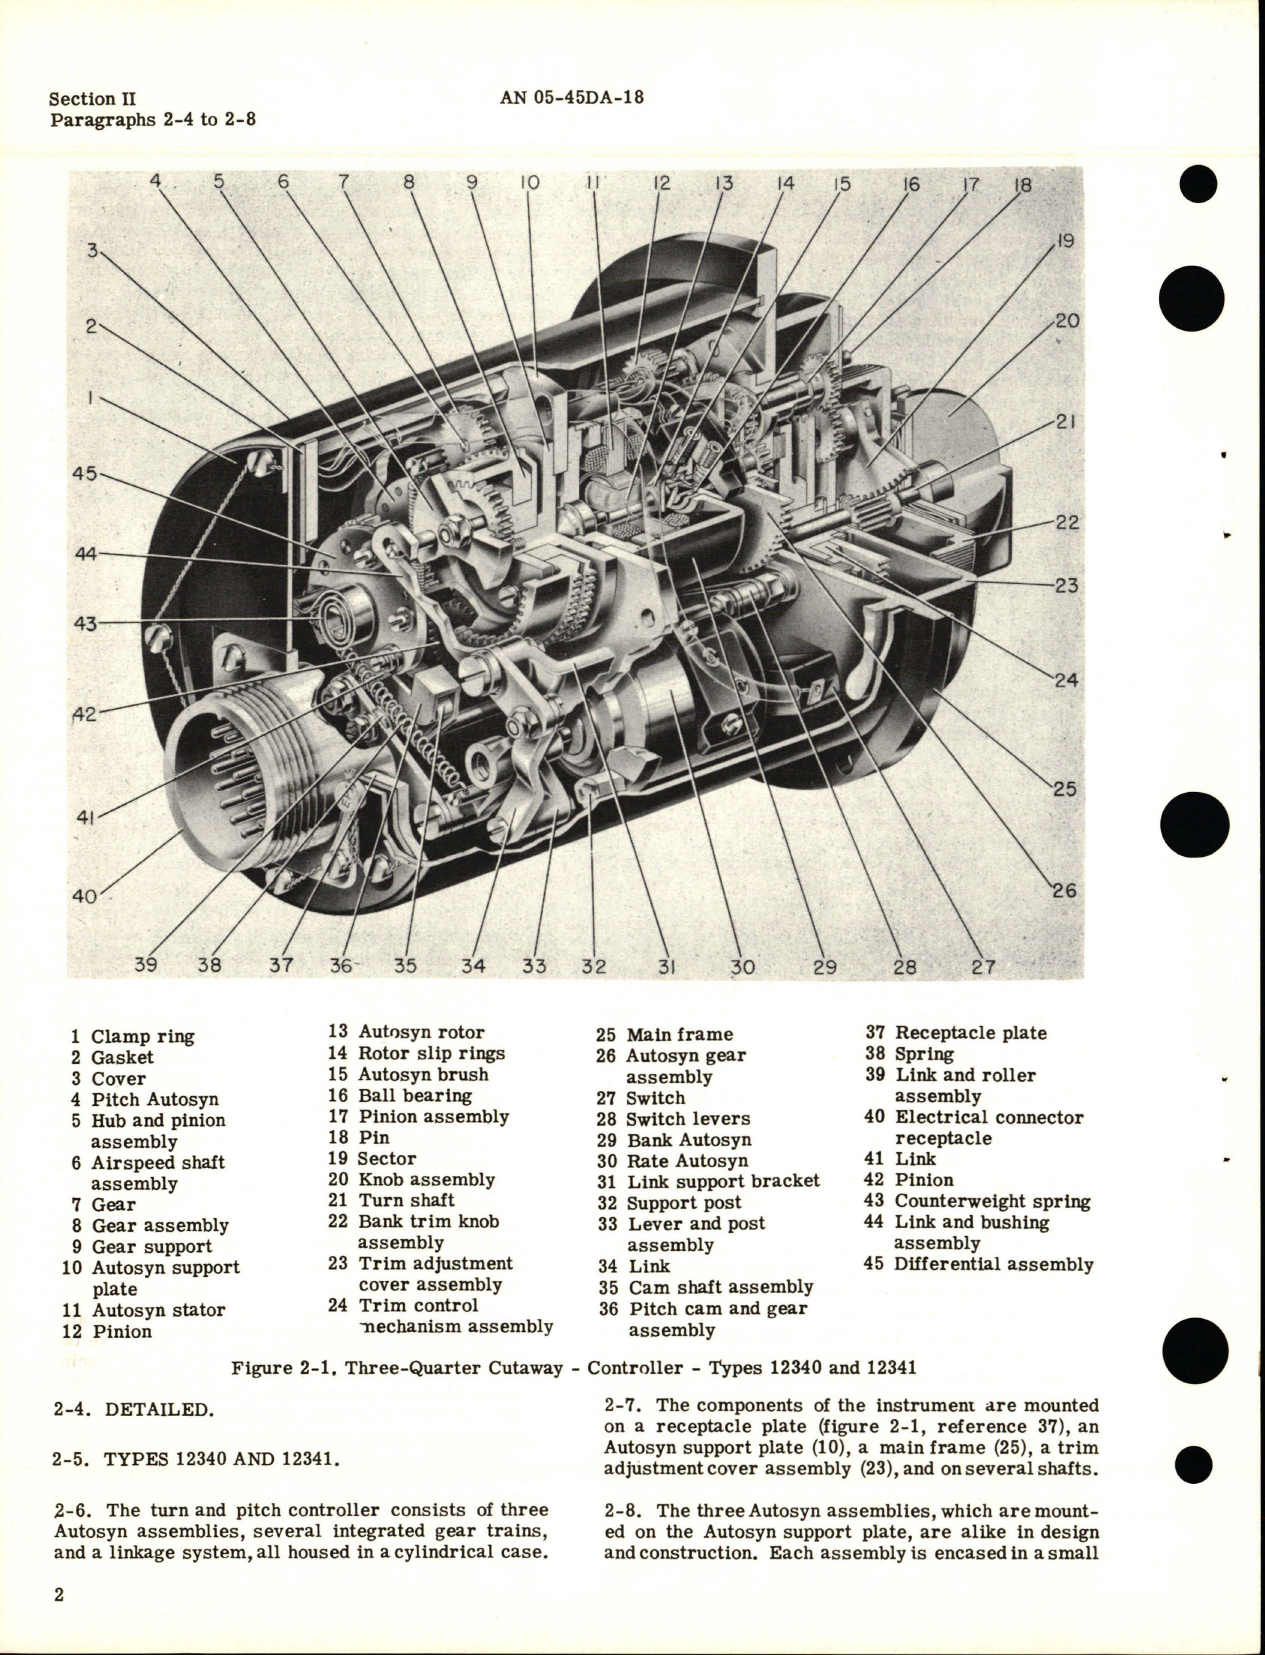 Sample page 8 from AirCorps Library document: Overhaul Instructions for Turn and Pitch Controller 